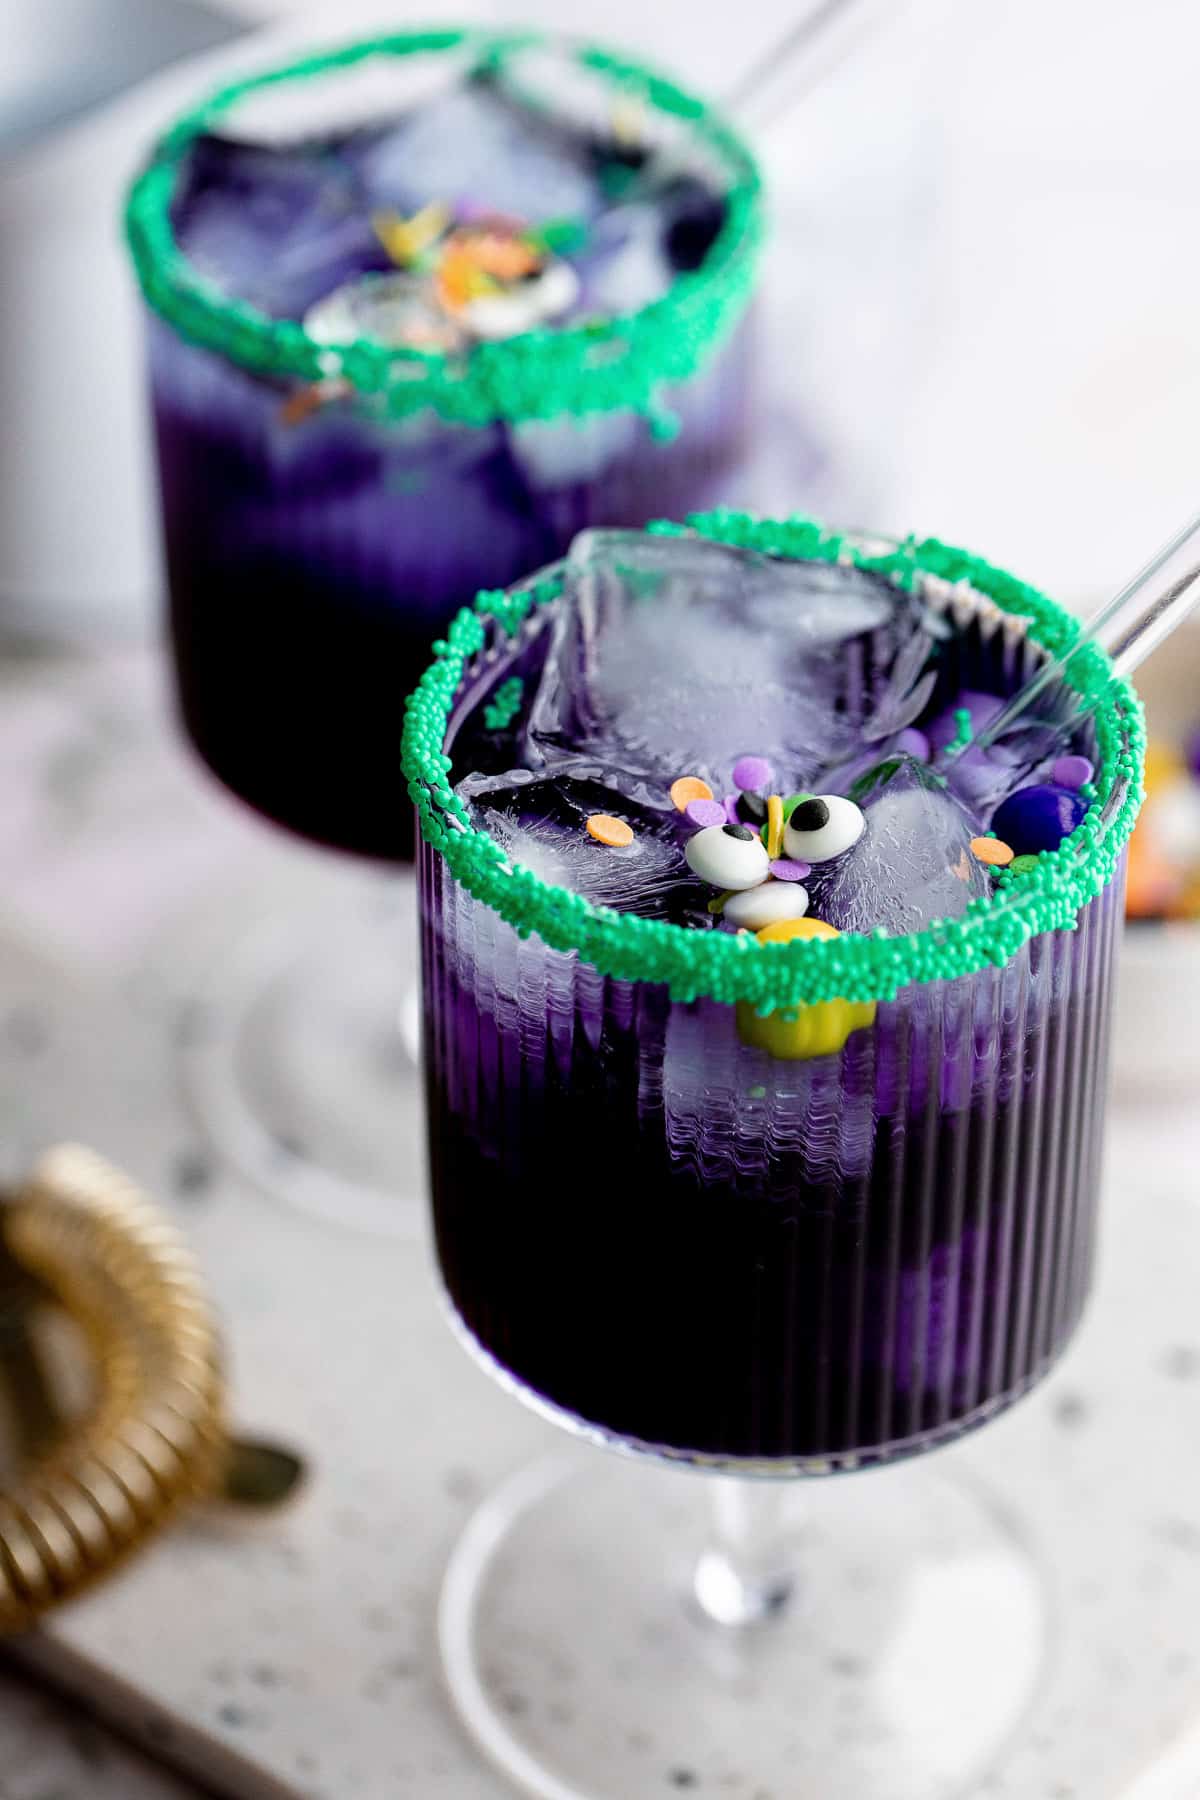 Two blue curacao Halloween cocktails garnished with sprinkles, candy eyes and glass straws.